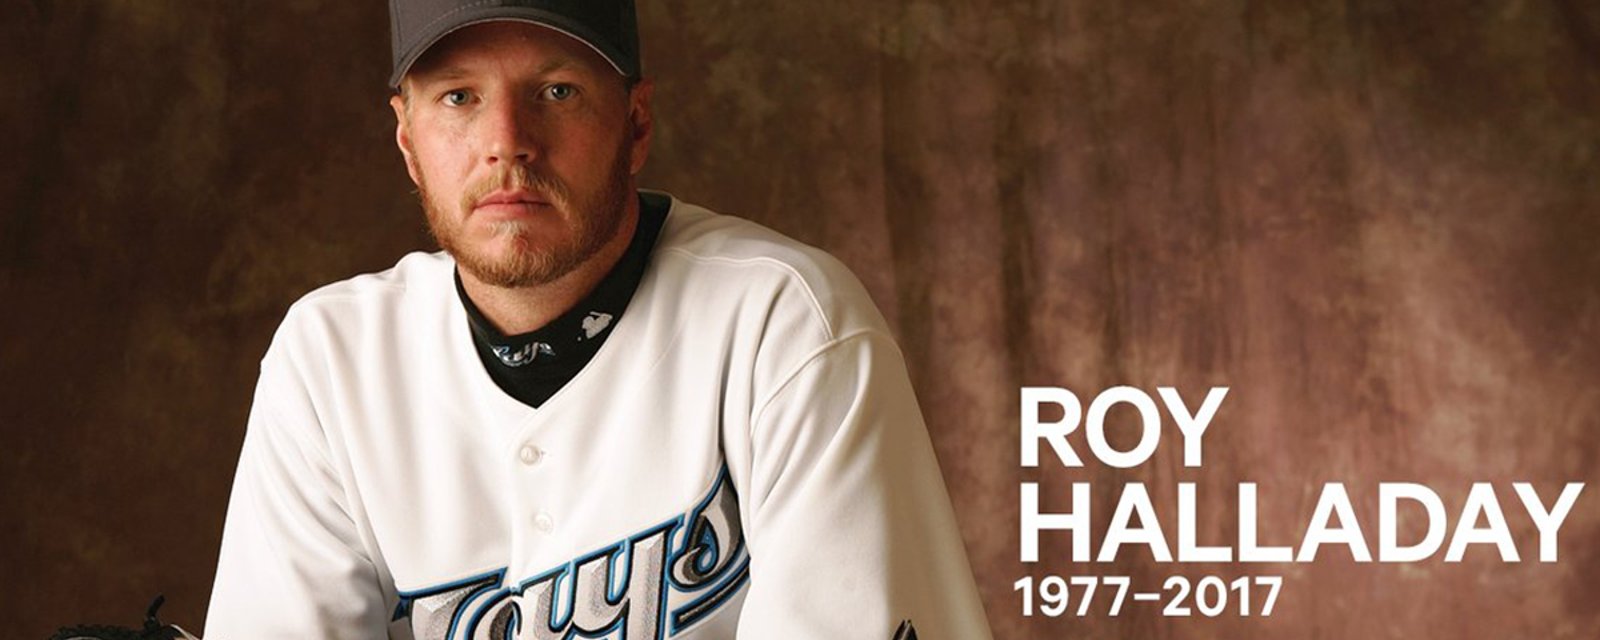 Must See: The Leafs’ touching tribute to Blue Jays legend Roy Halladay